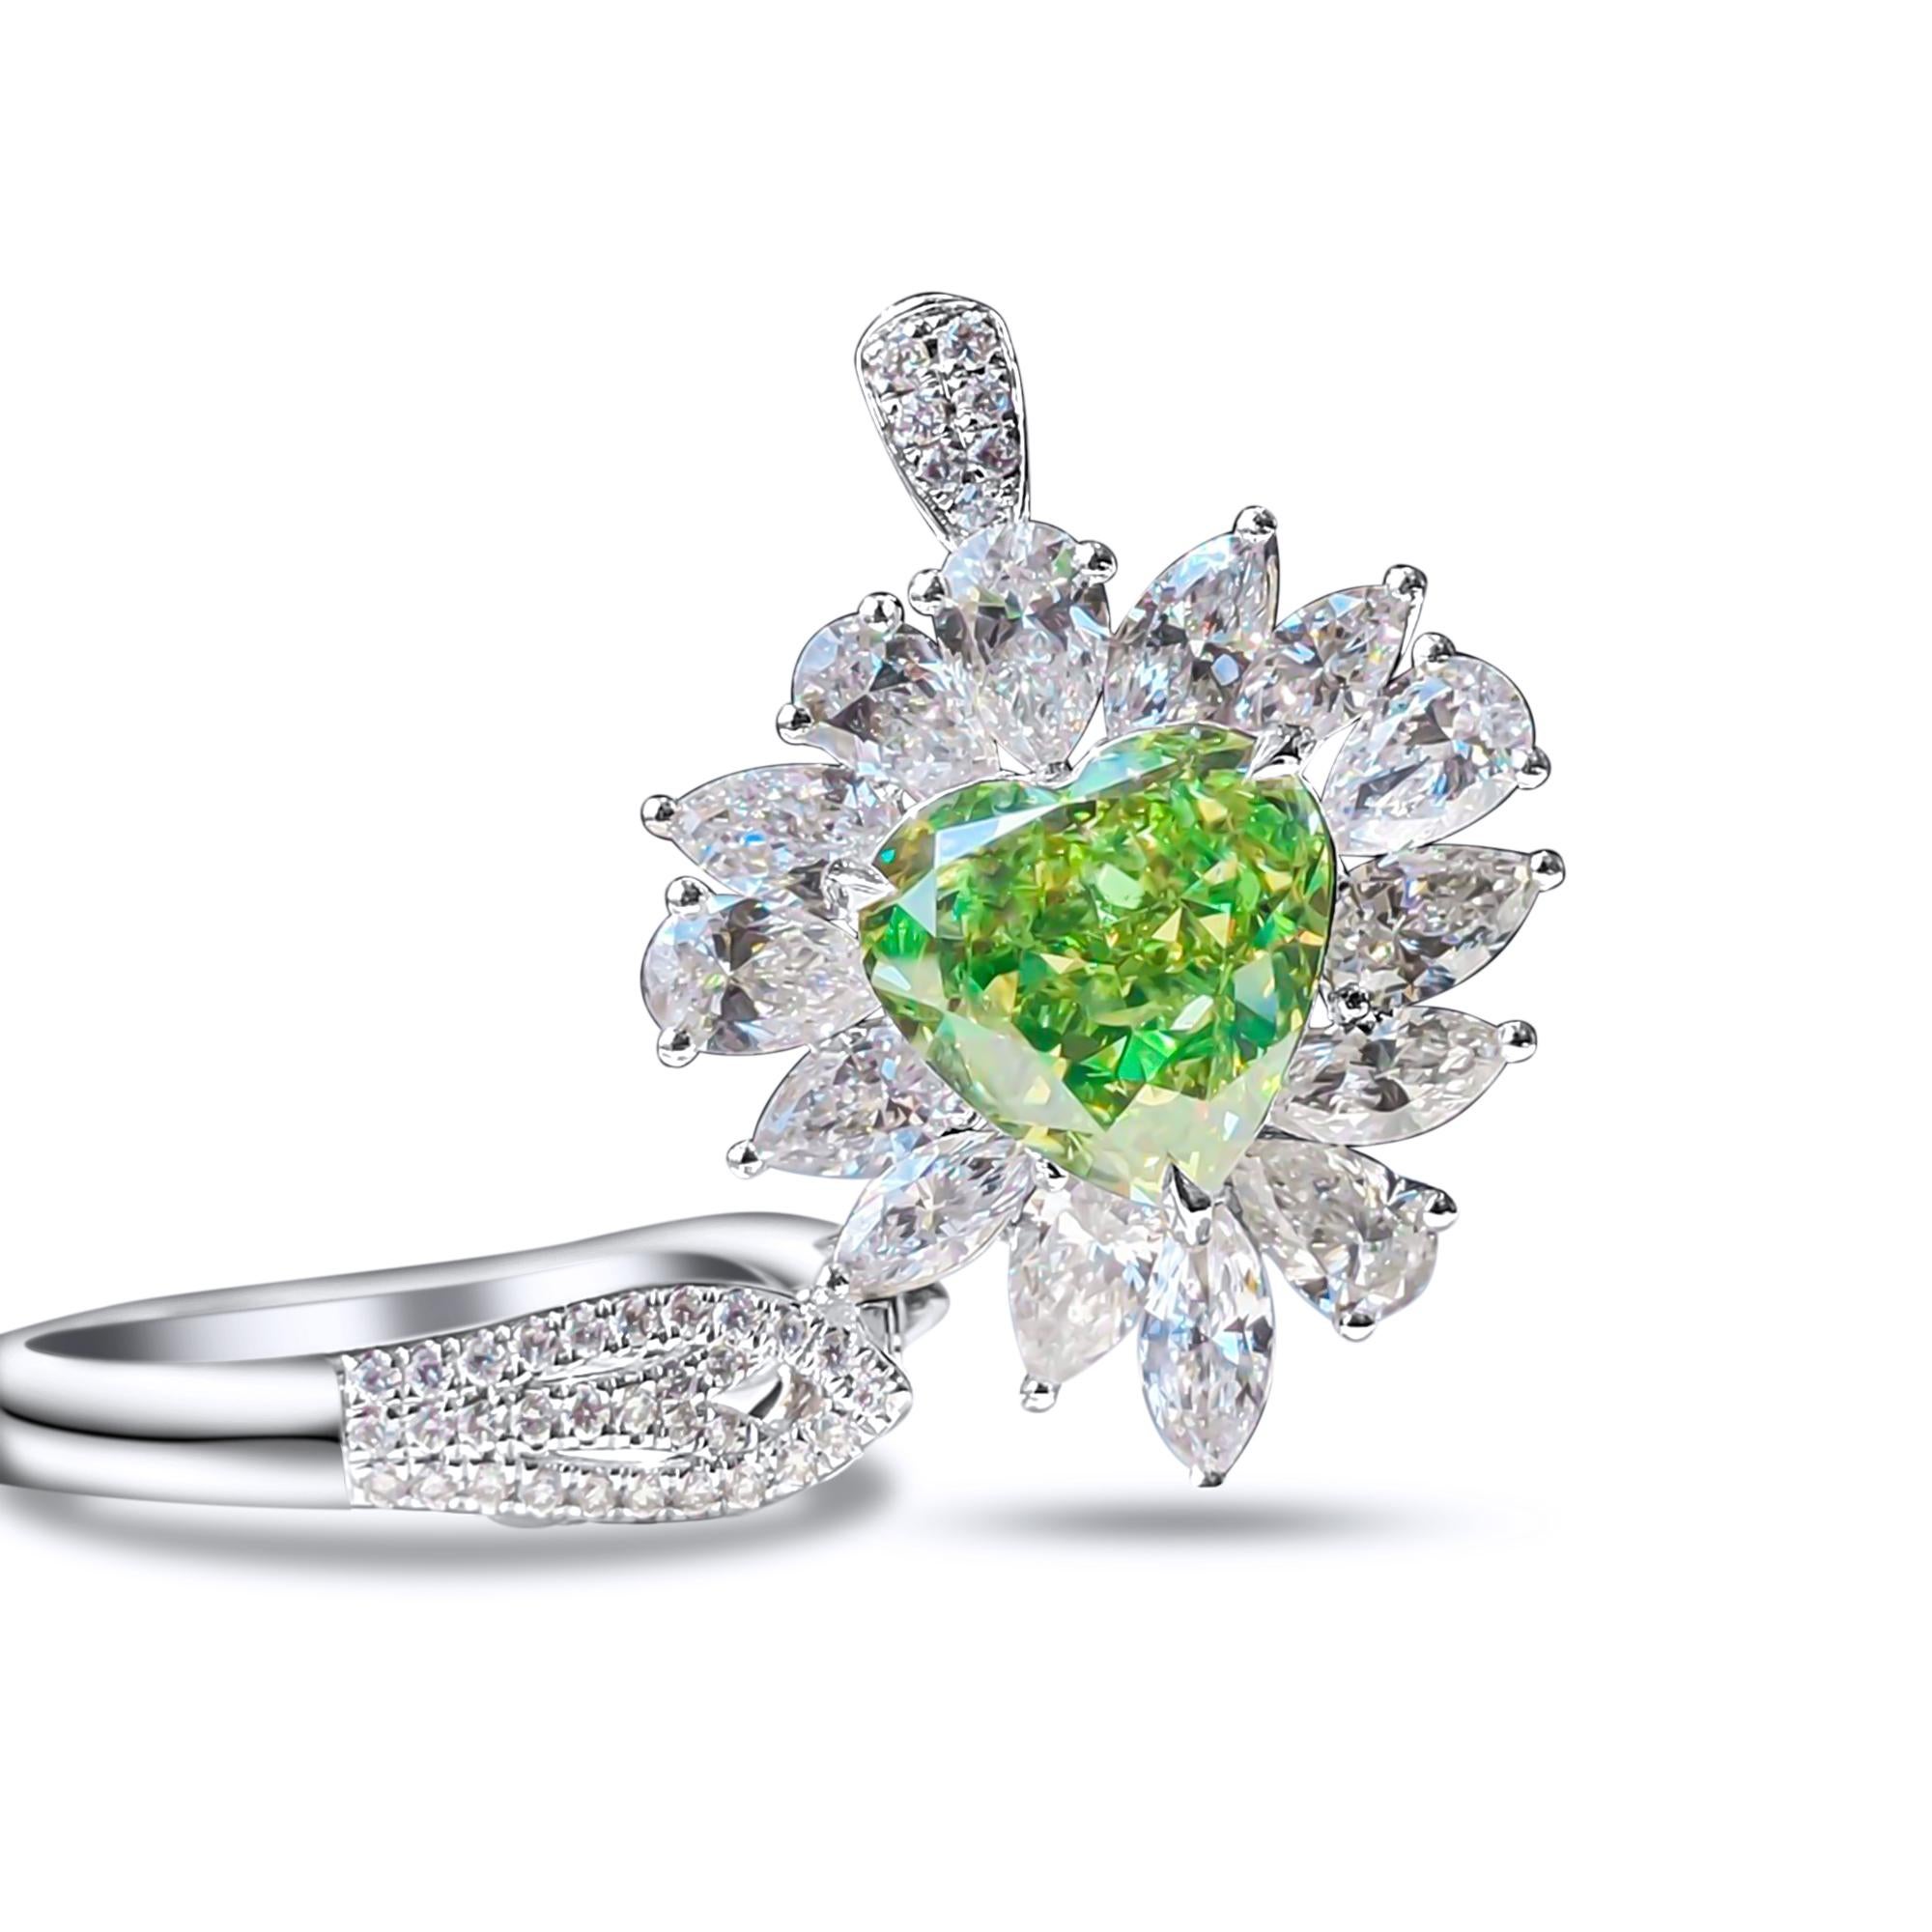 We invite you to discover this majestic ring set with a GIA certified heart-cut green diamond of 5.07 carats accented with pear-cut colorless diamonds of 3 carats in total. Versatile, you can also wear it as a magnificent pendant 

New ring 
Main